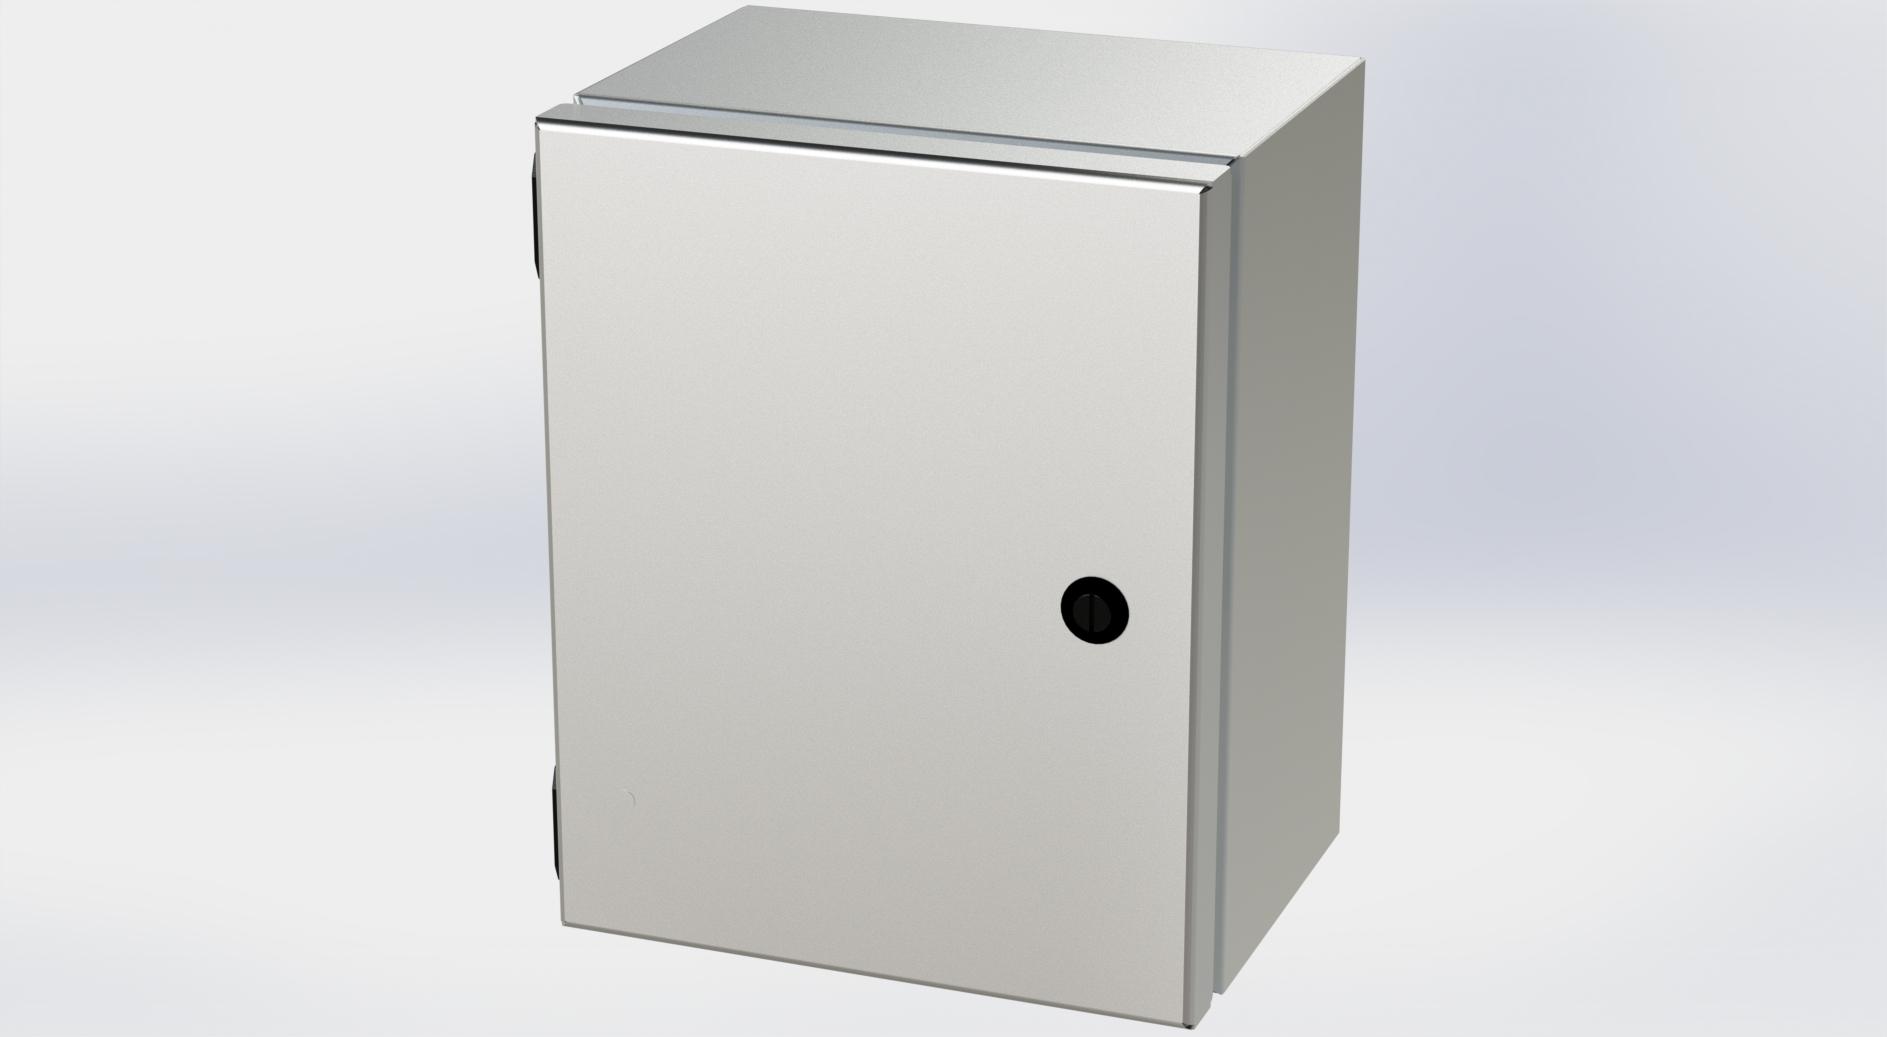 Saginaw Control SCE-10086ELJSS S.S. ELJ Enclosure, Height:10.00", Width:8.00", Depth:6.00", #4 brushed finish on all exterior surfaces. Optional sub-panels are powder coated white.